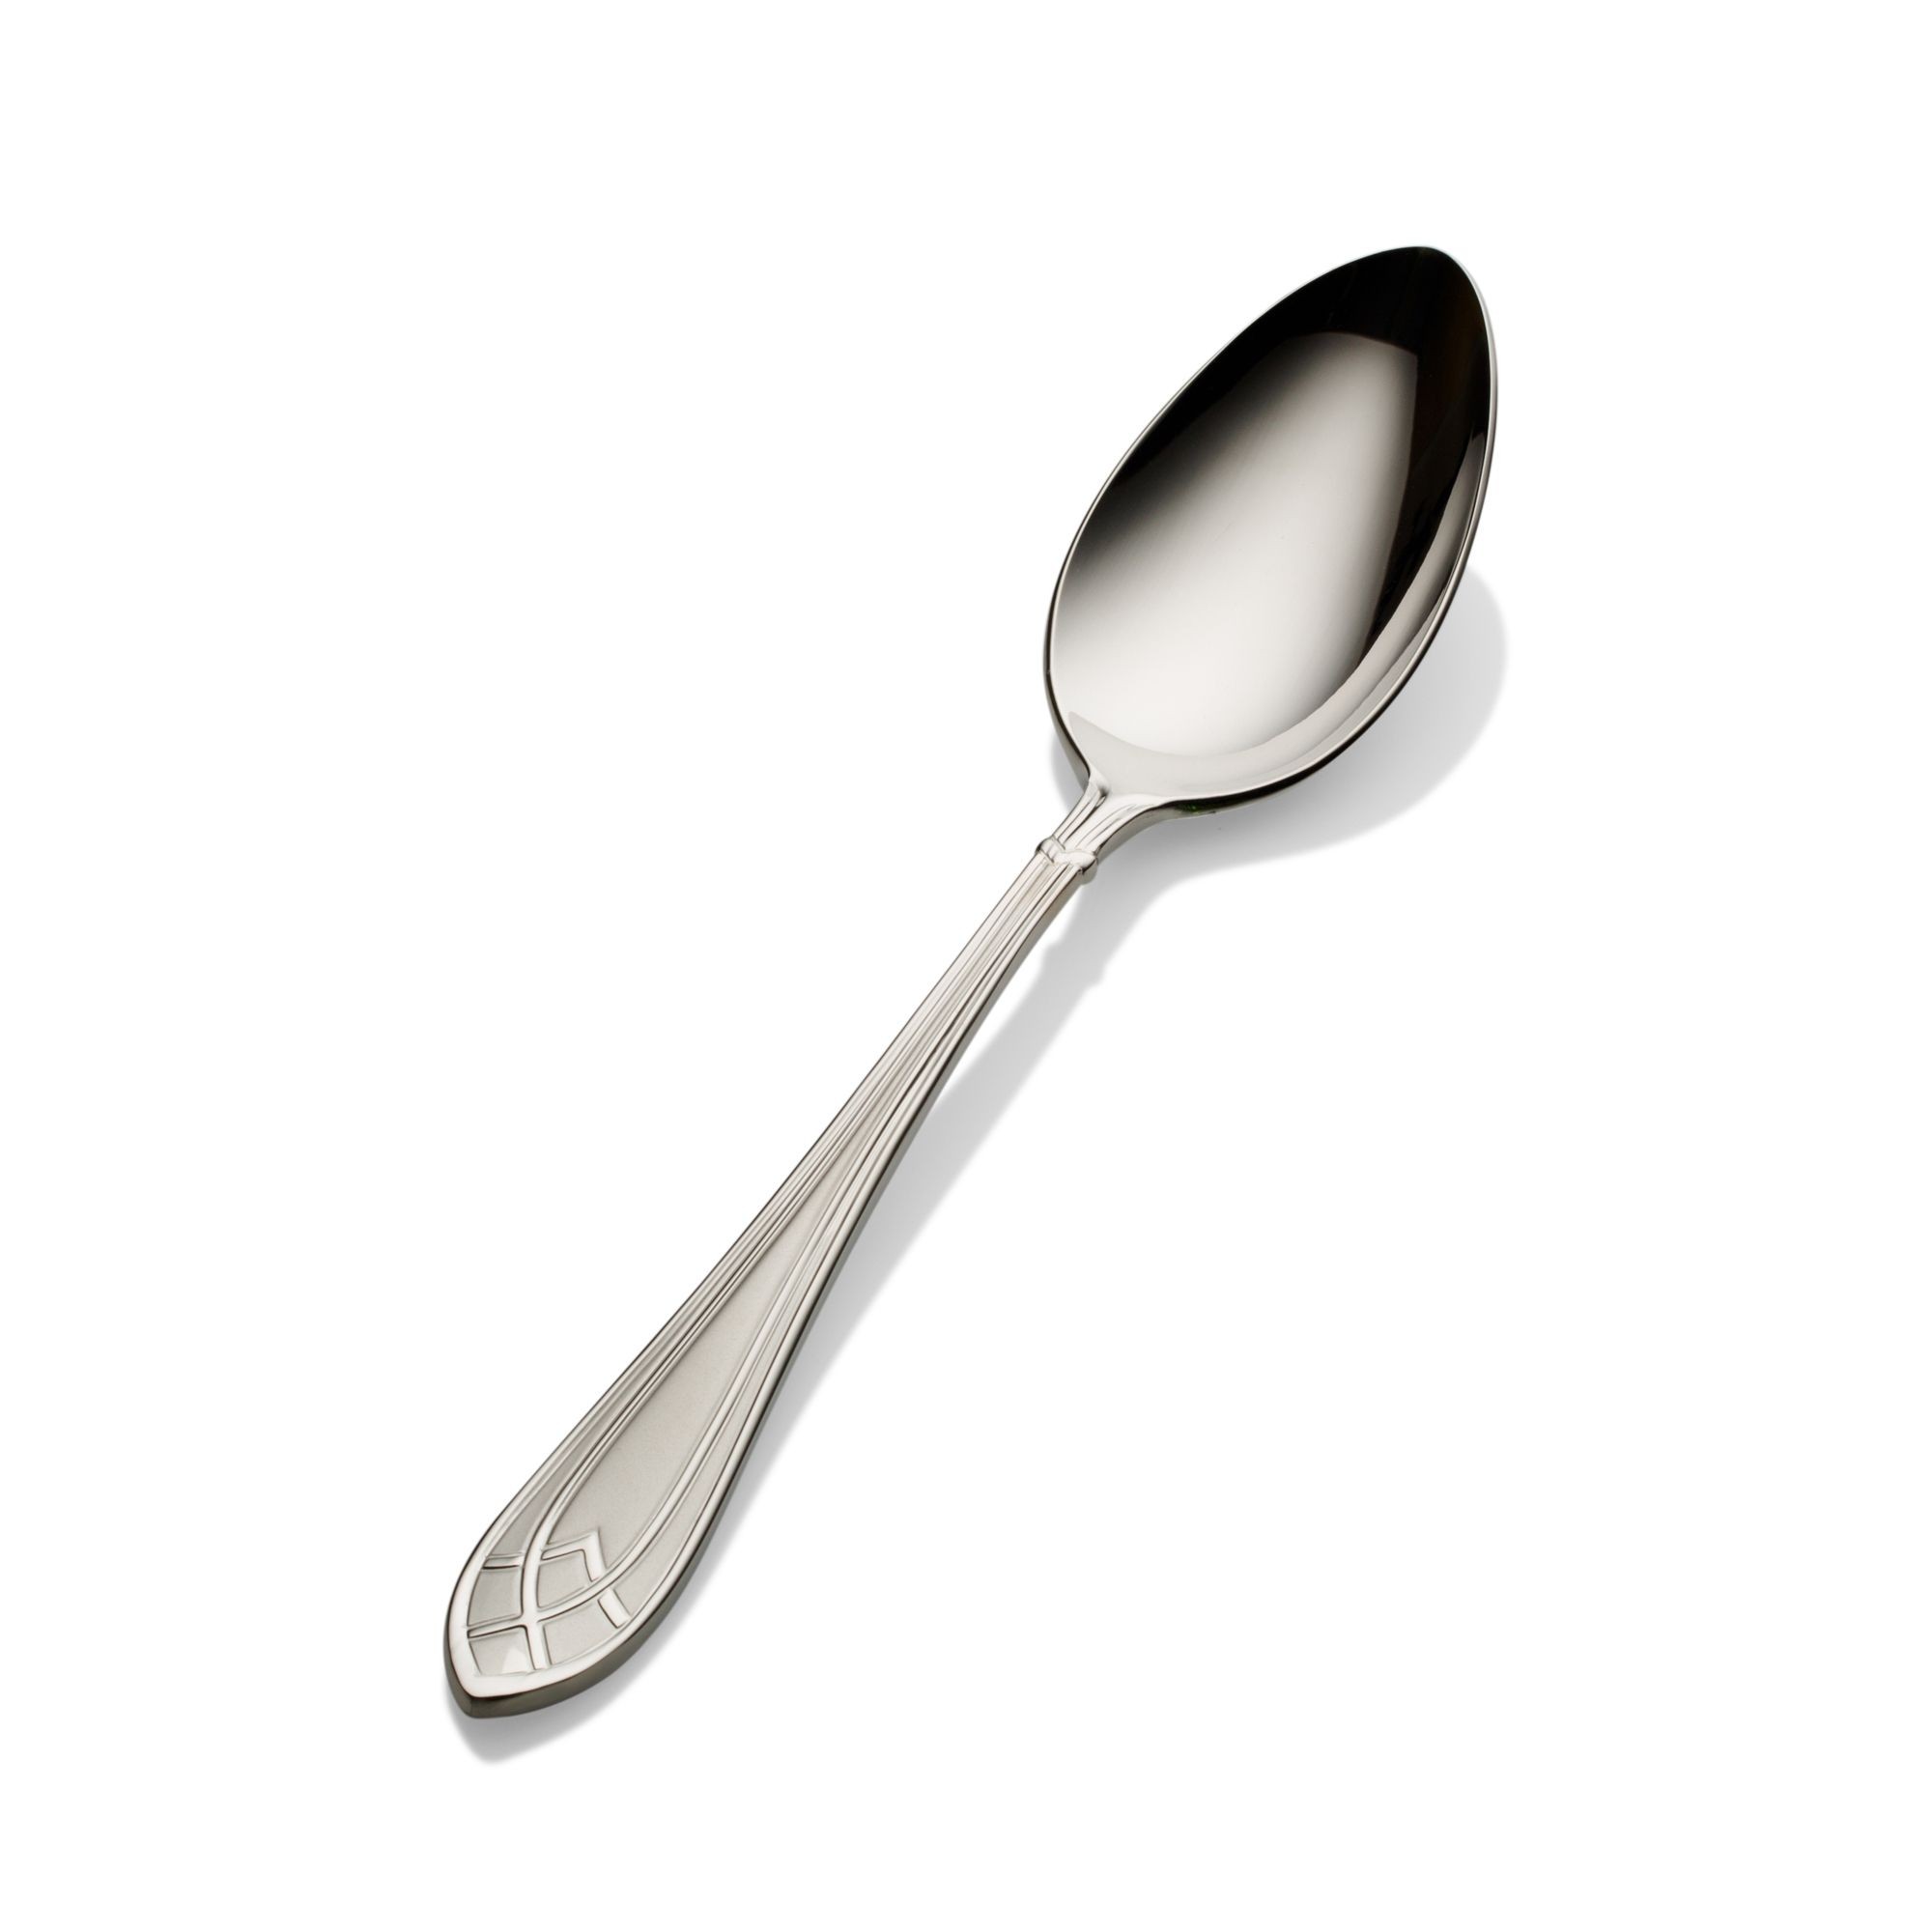 Bon Chef S1403 Viva 18/8 Stainless Steel Soup and Dessert Spoon